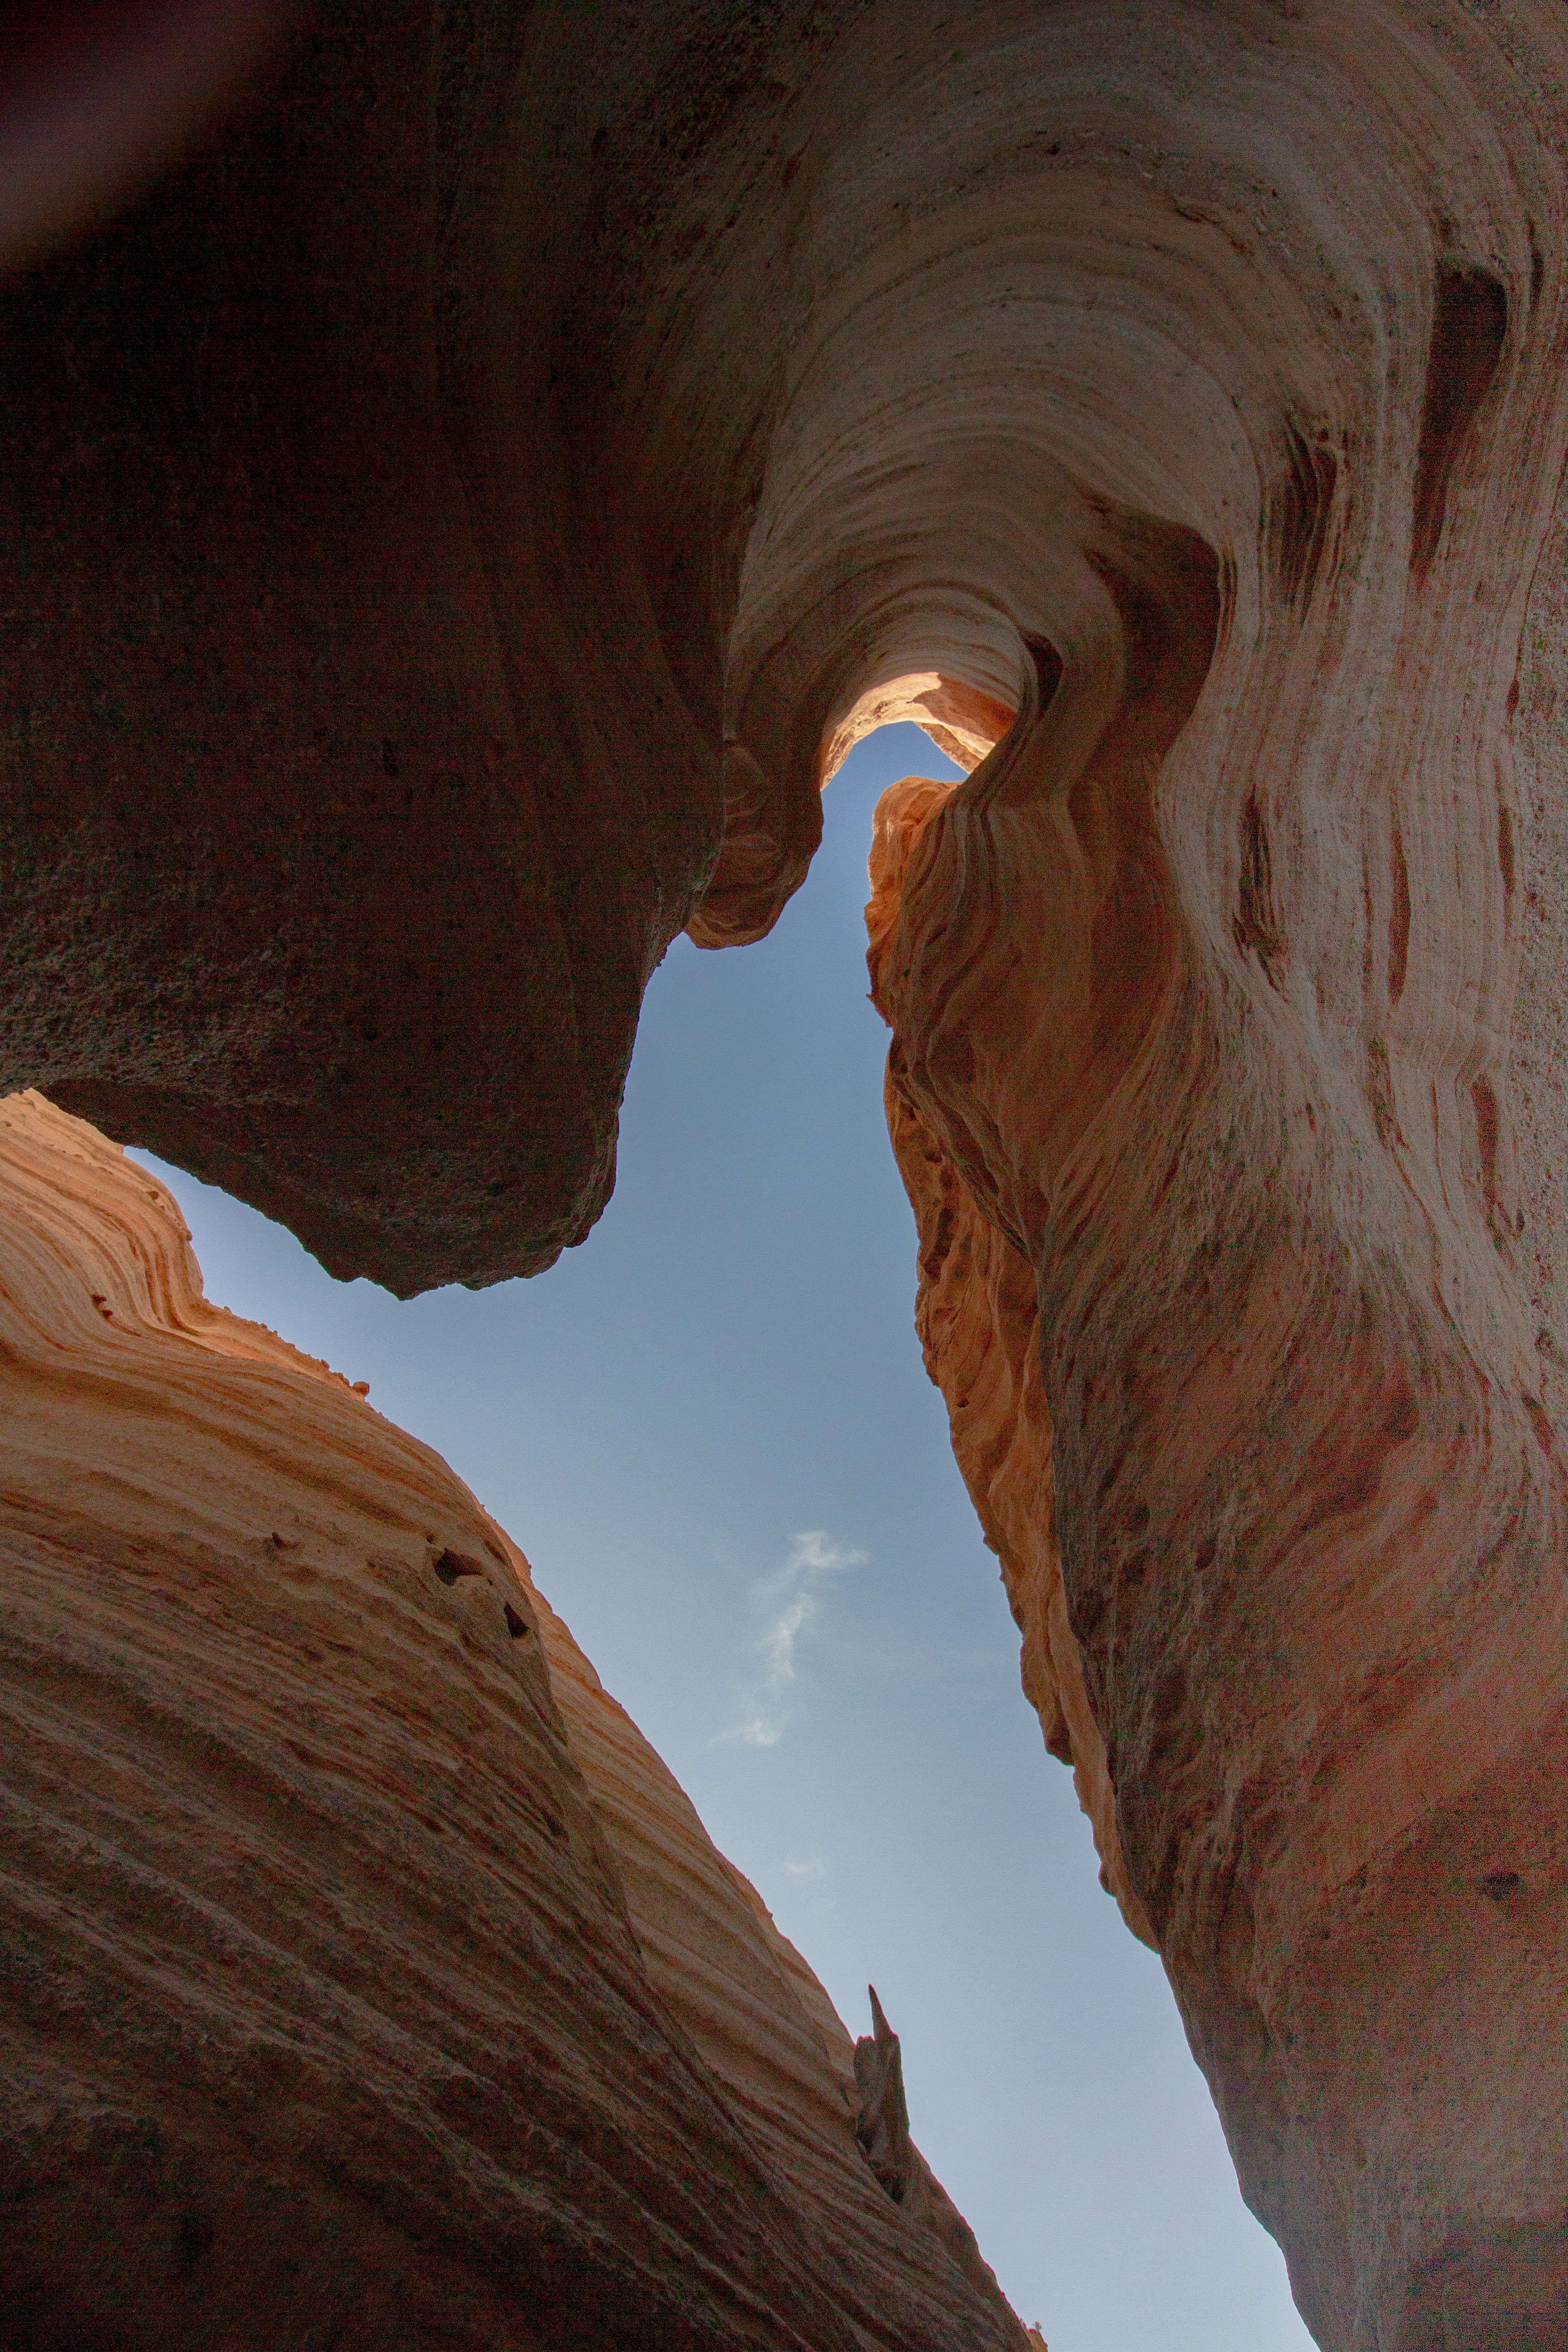 Tentrocks State Park in New Mexico is an easy access slot canyon. Great light and formation with some great photo opportunities